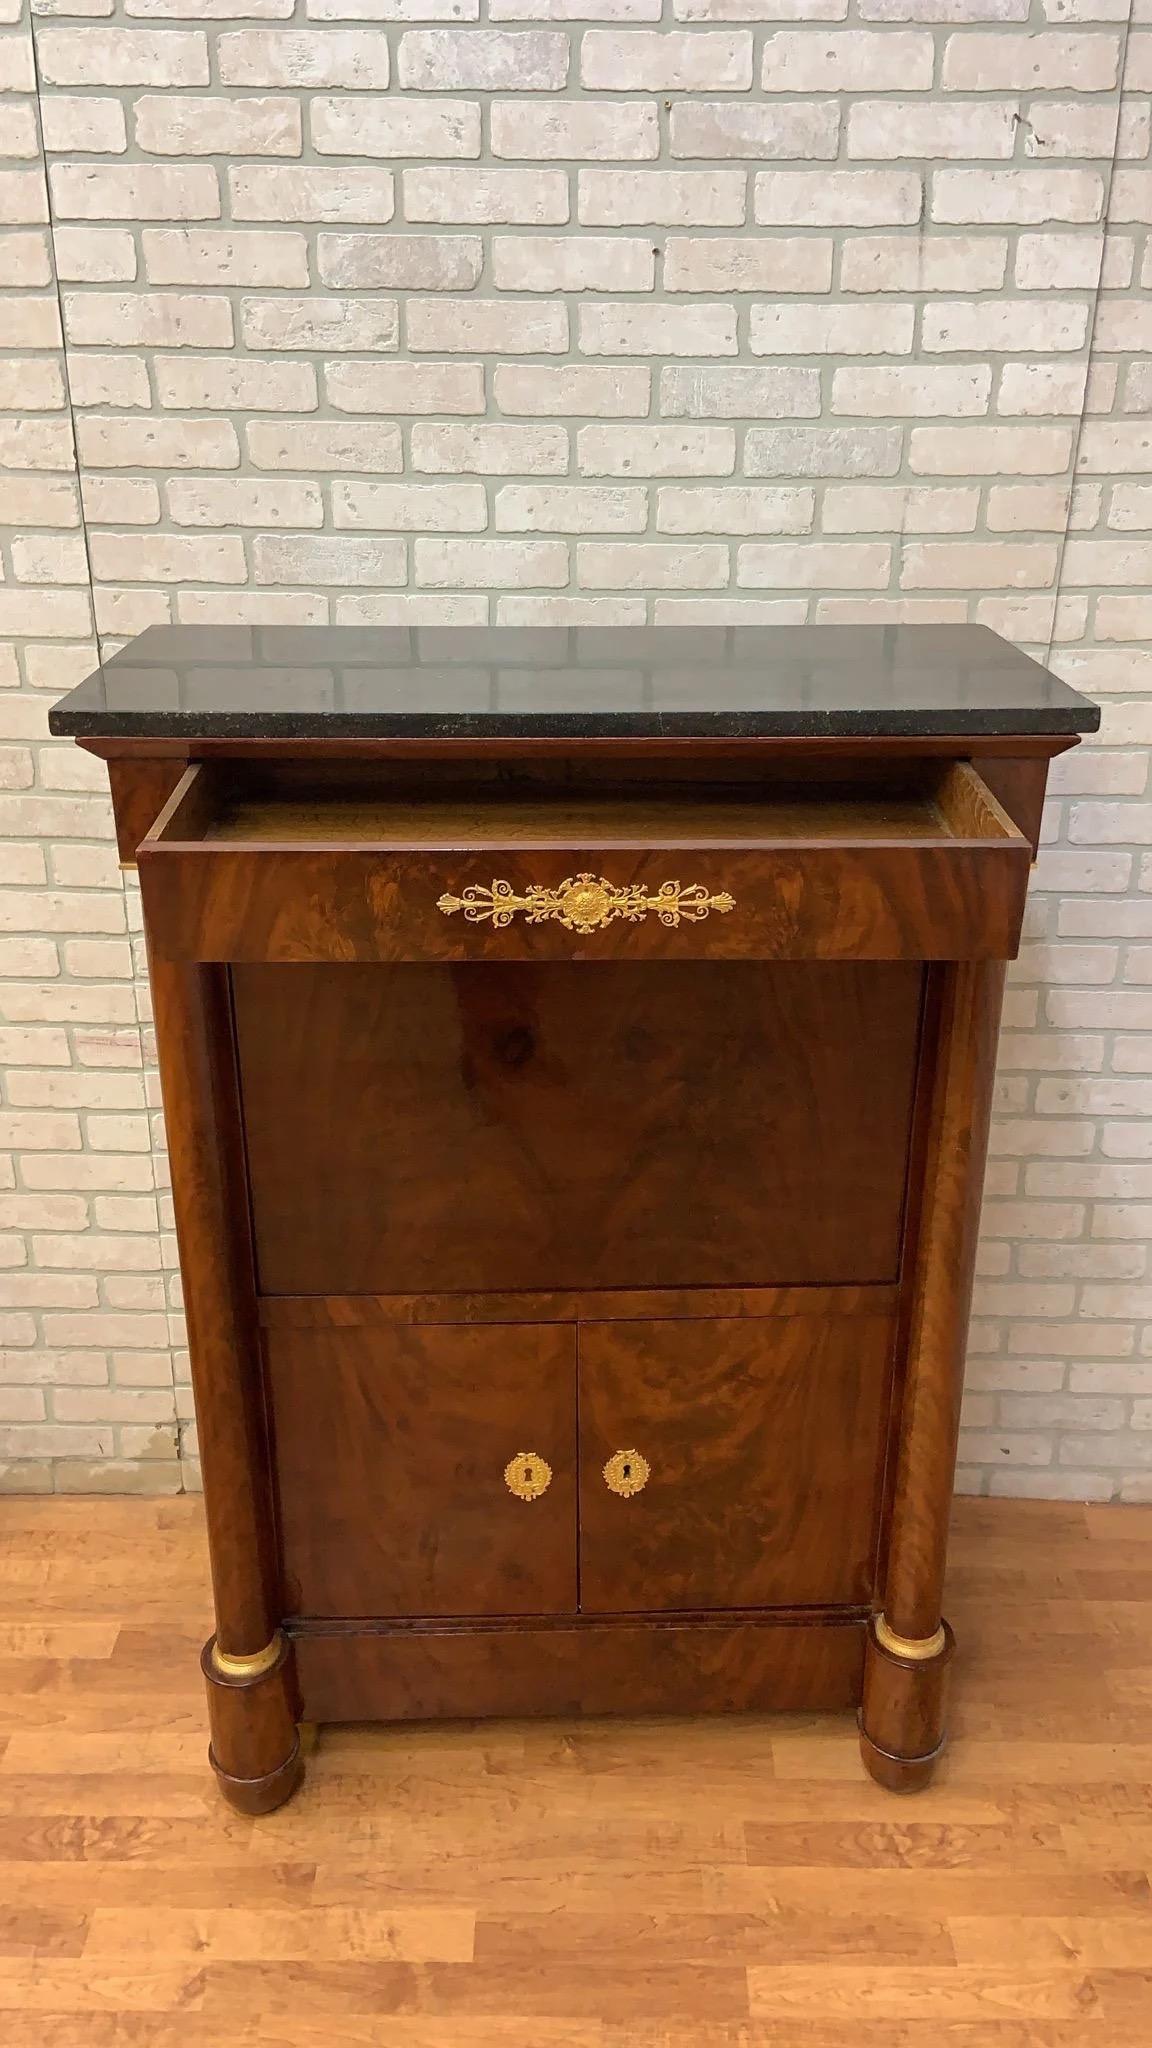 Antique French Empire Mahogany Gilt-Bronze Mounted Marble-Top Abattant Secretary In Good Condition For Sale In Chicago, IL